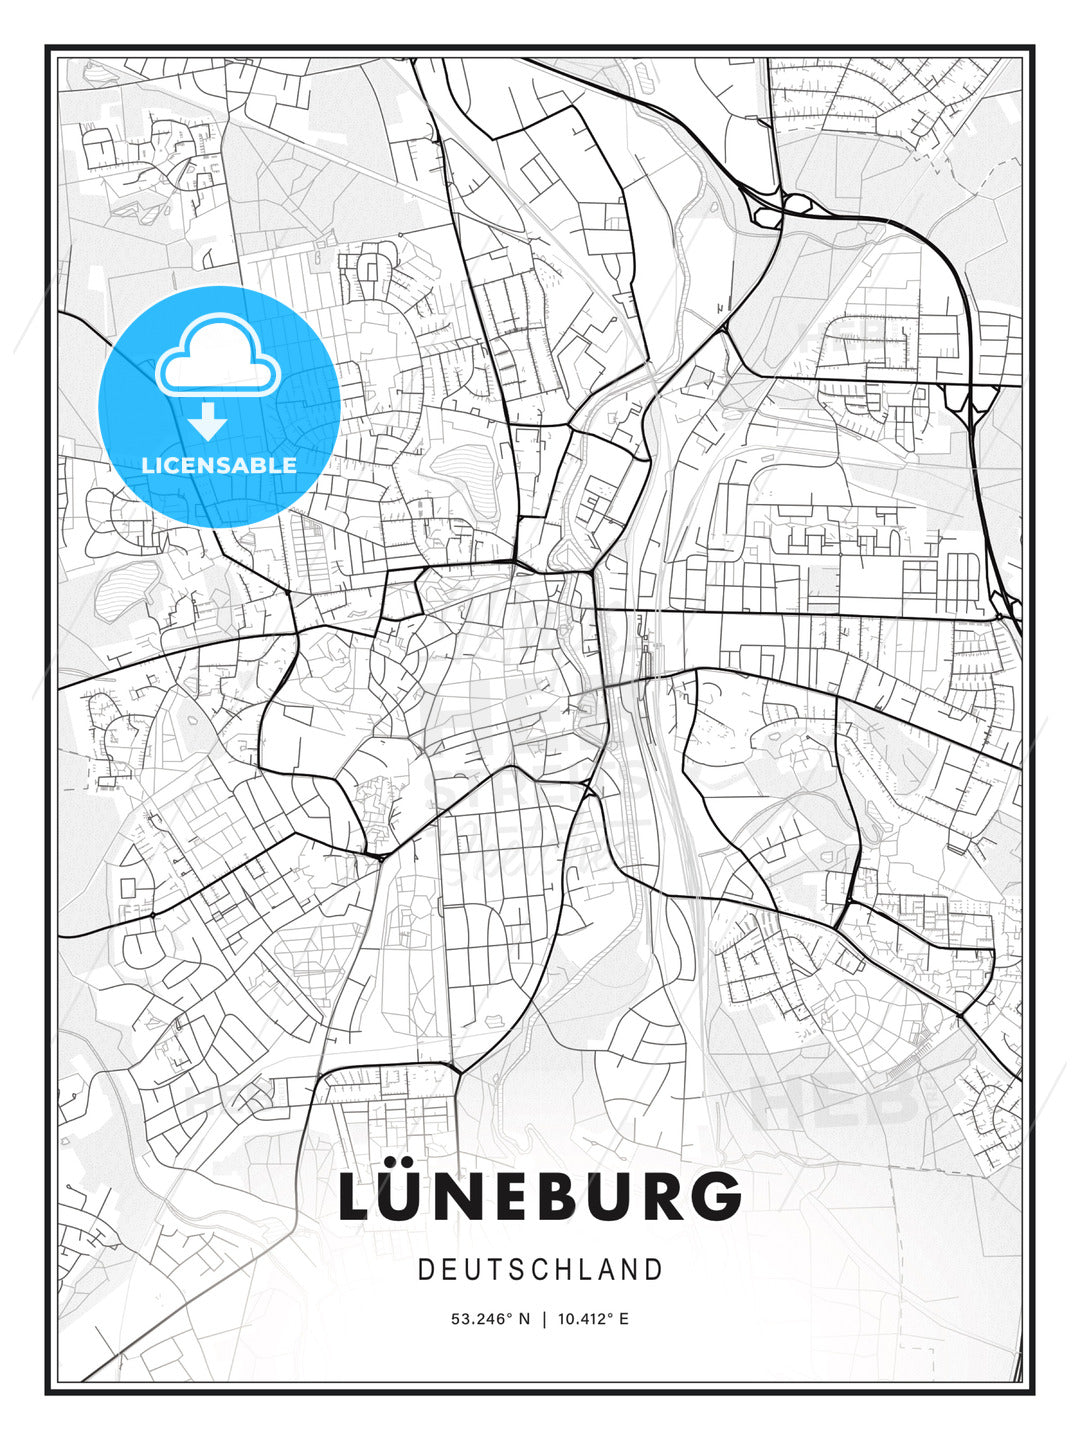 LÜNEBURG / Luneburg, Germany, Modern Print Template in Various Formats - HEBSTREITS Sketches